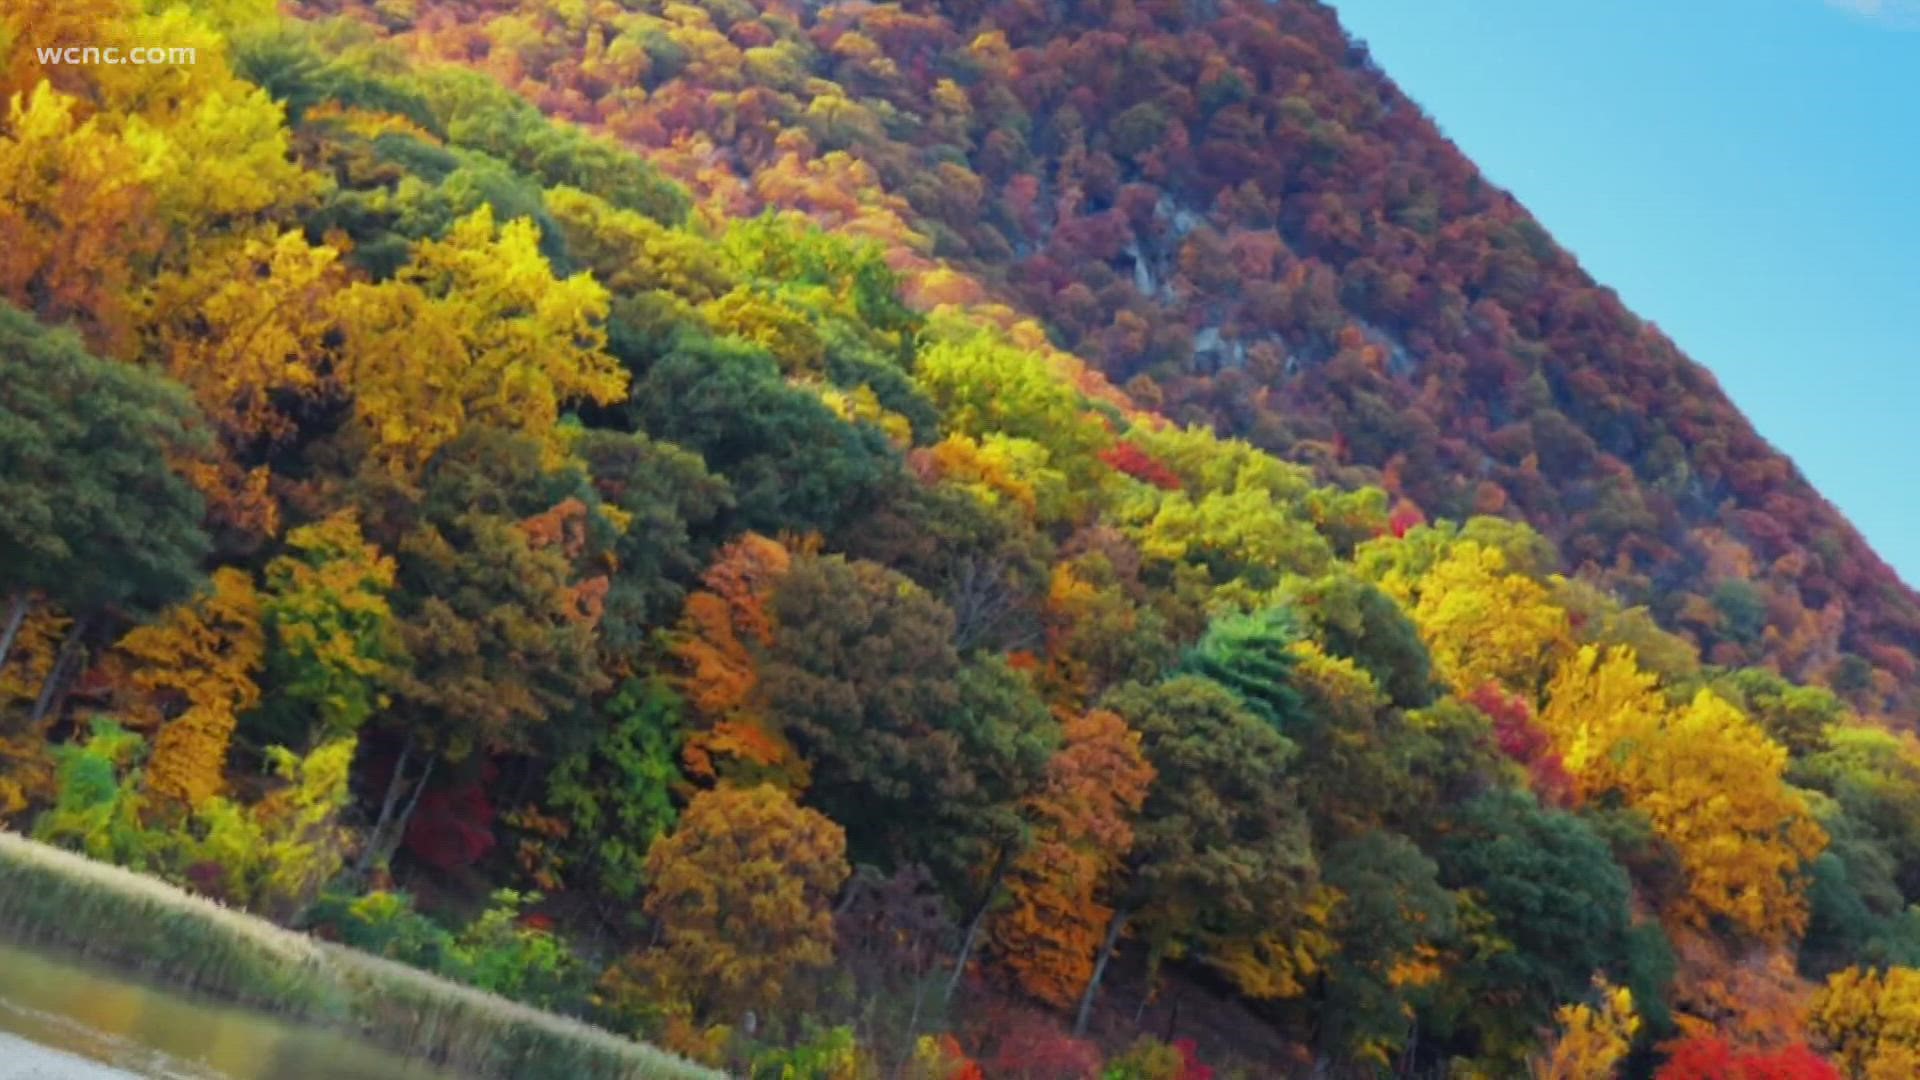 No one fall foliage display is the same and it all depends on the weather starting in the Spring. Here is why the leaves change and how weather effects the change.